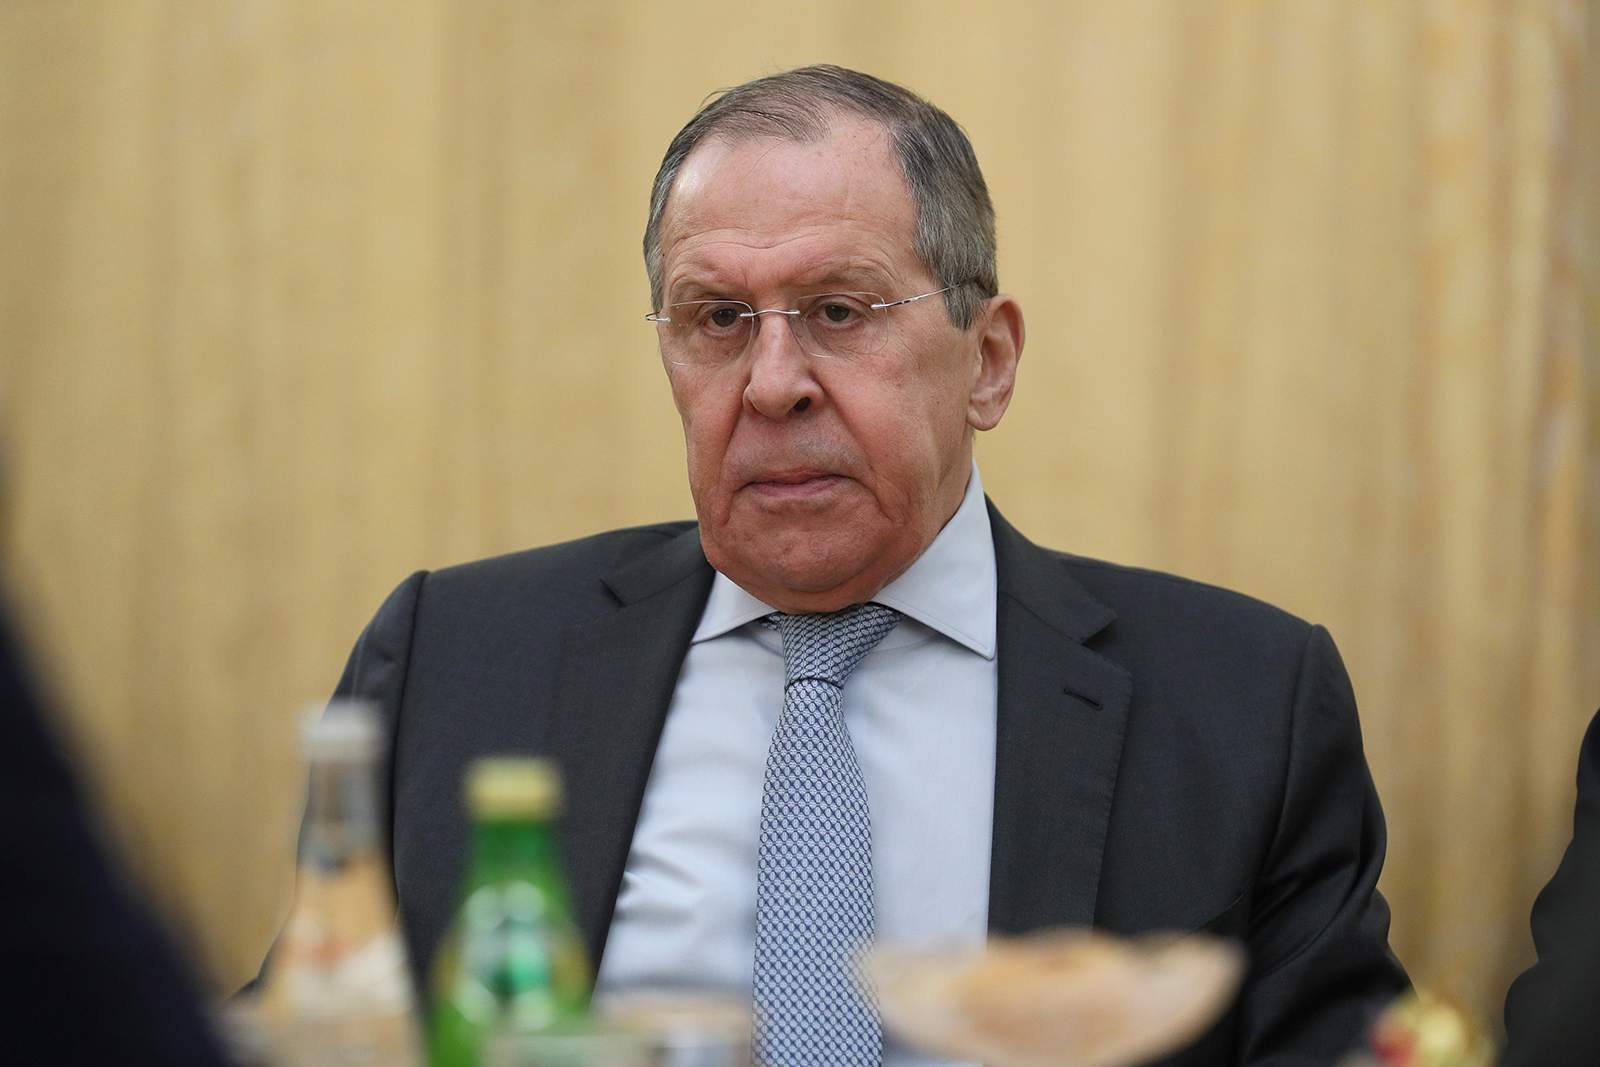 Russia's Foreign Minister Sergey Lavrov at the Russian Ministry of Foreign Affairs in Moscow, Russia, on February 23.